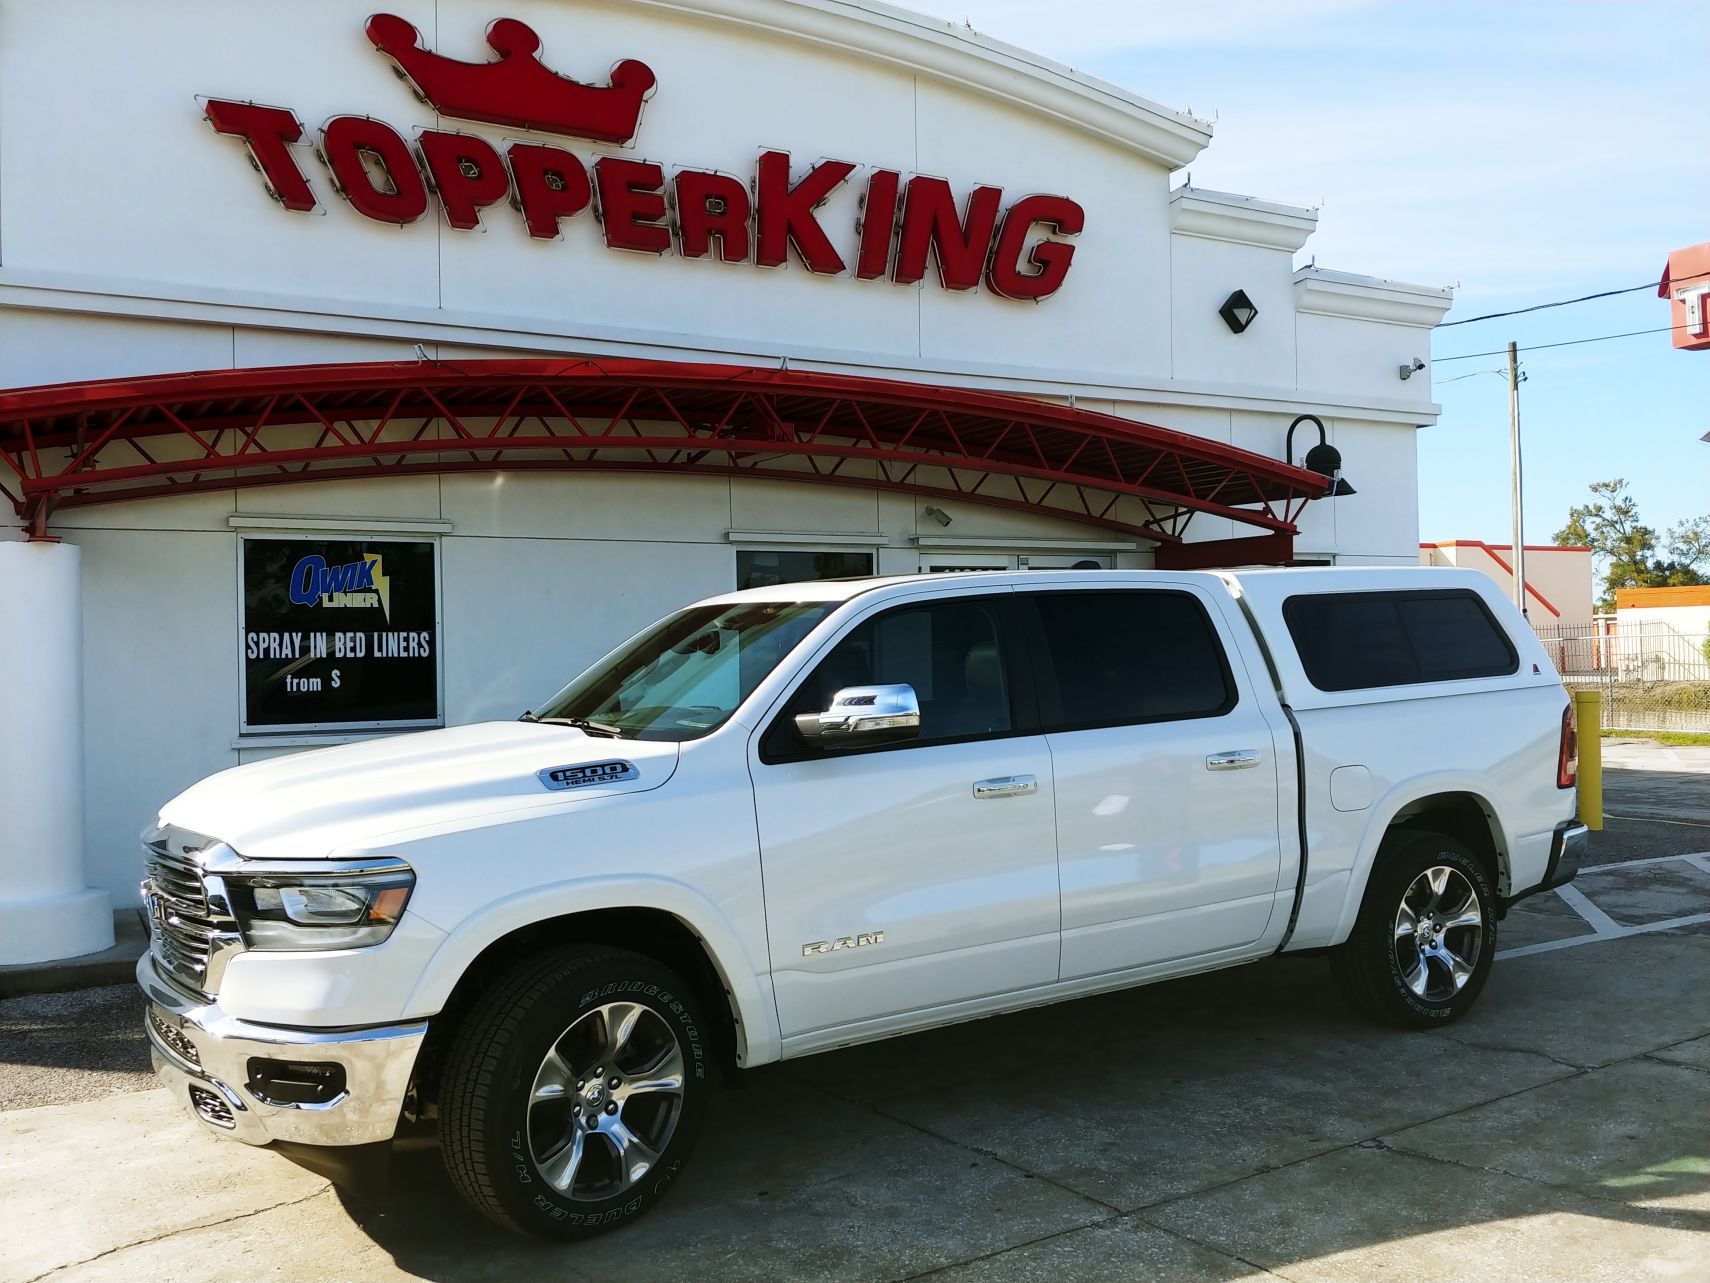 Topper King Truck Accessories